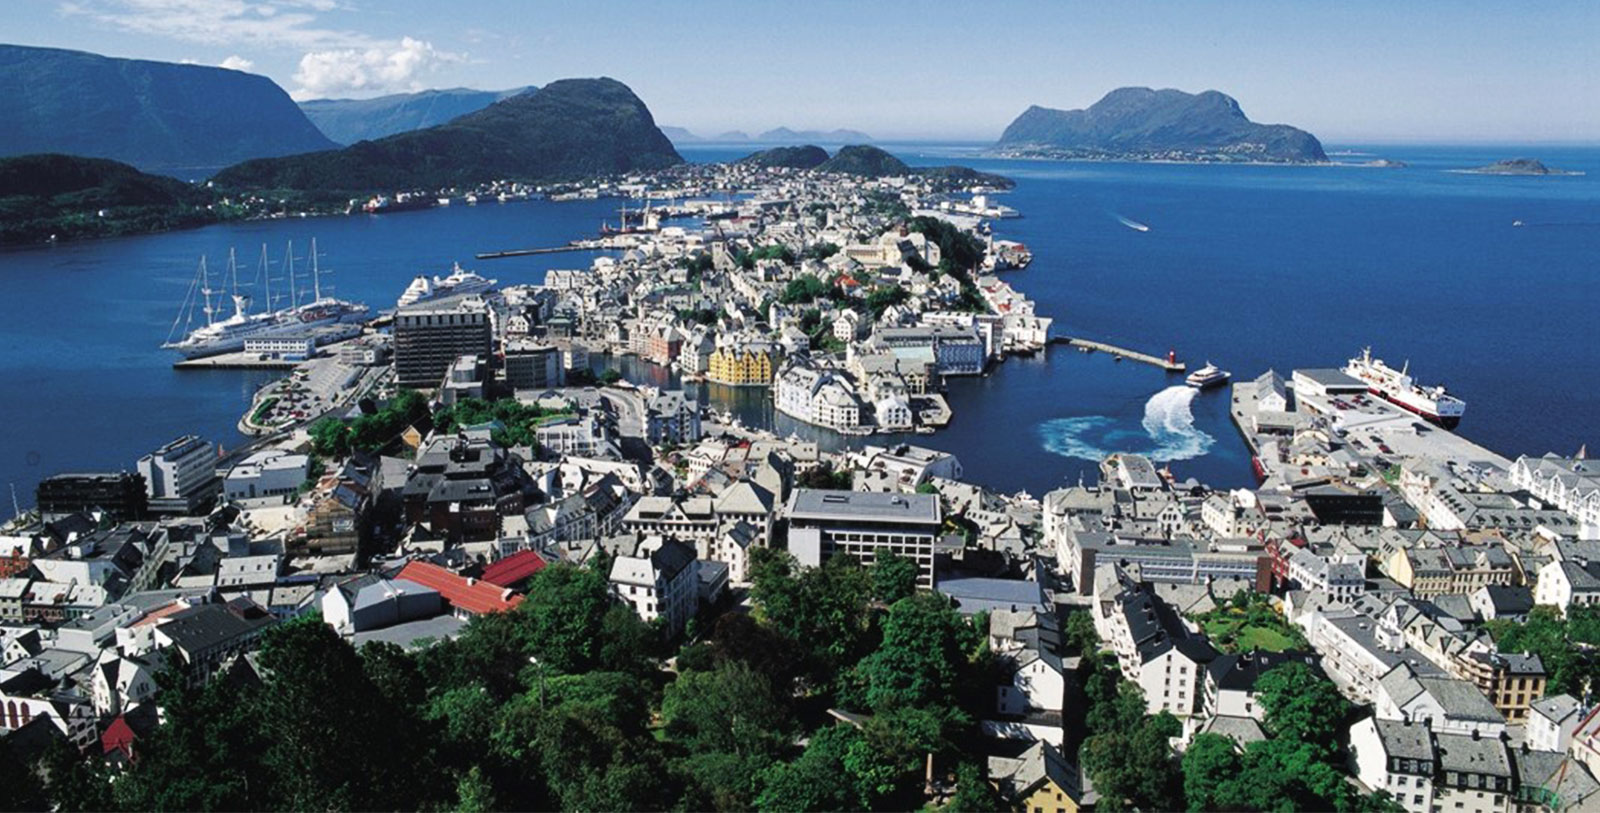 Explore the charming city of Ålesund and take in the views from atop Mount Aksla.